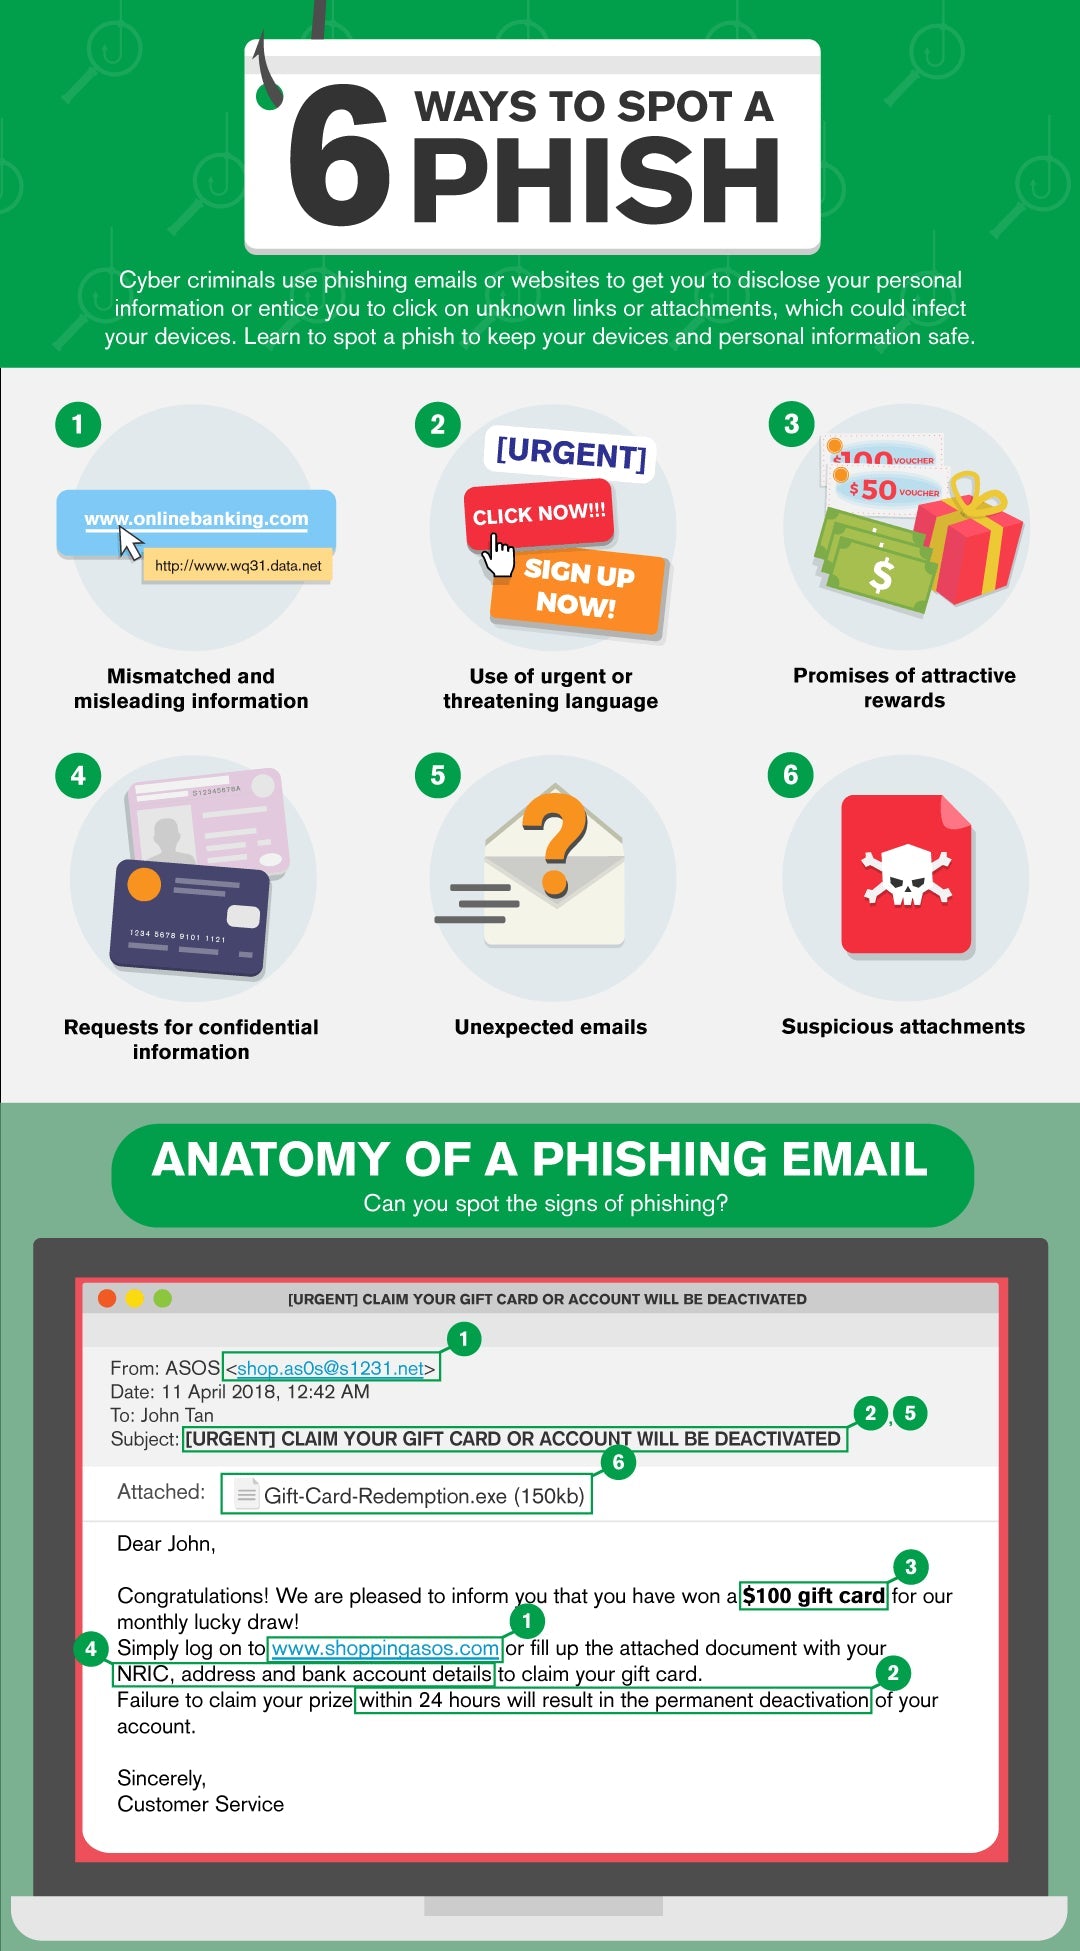 How to spot a phish infographic